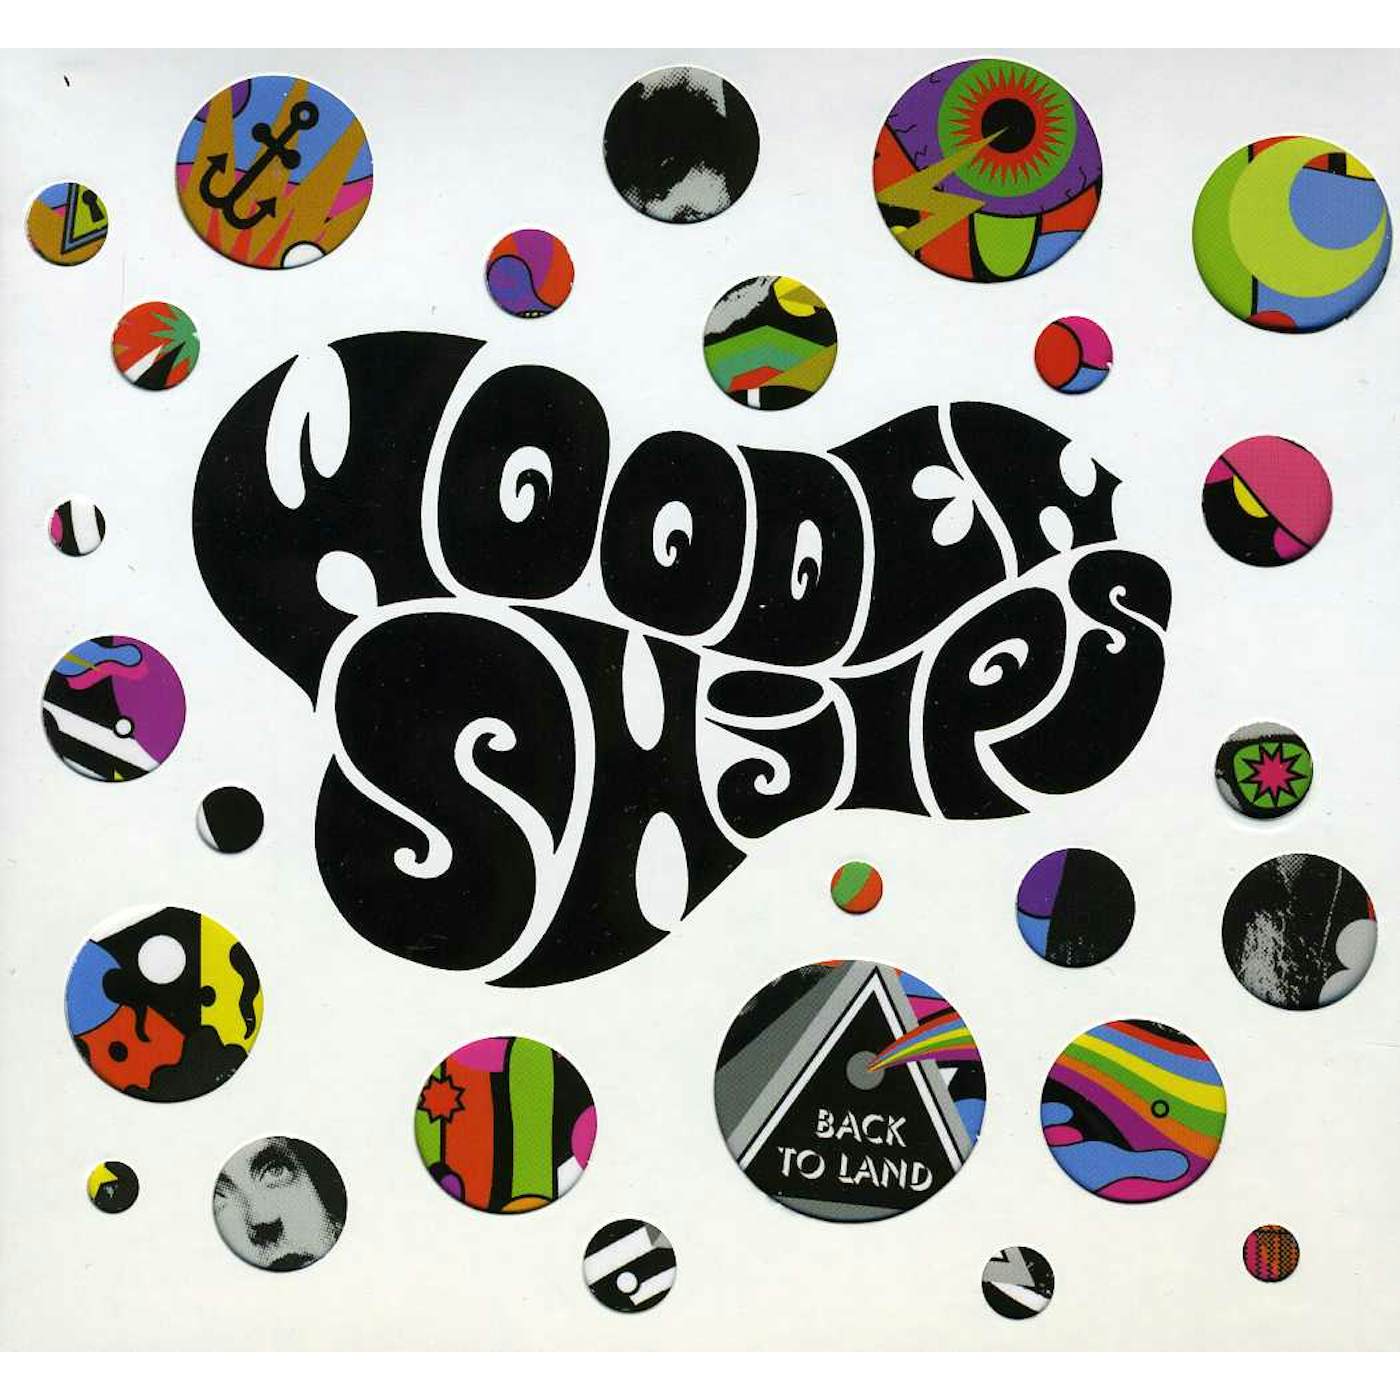 Wooden Shjips BACK TO LAND: AUSSIE EDITION CD